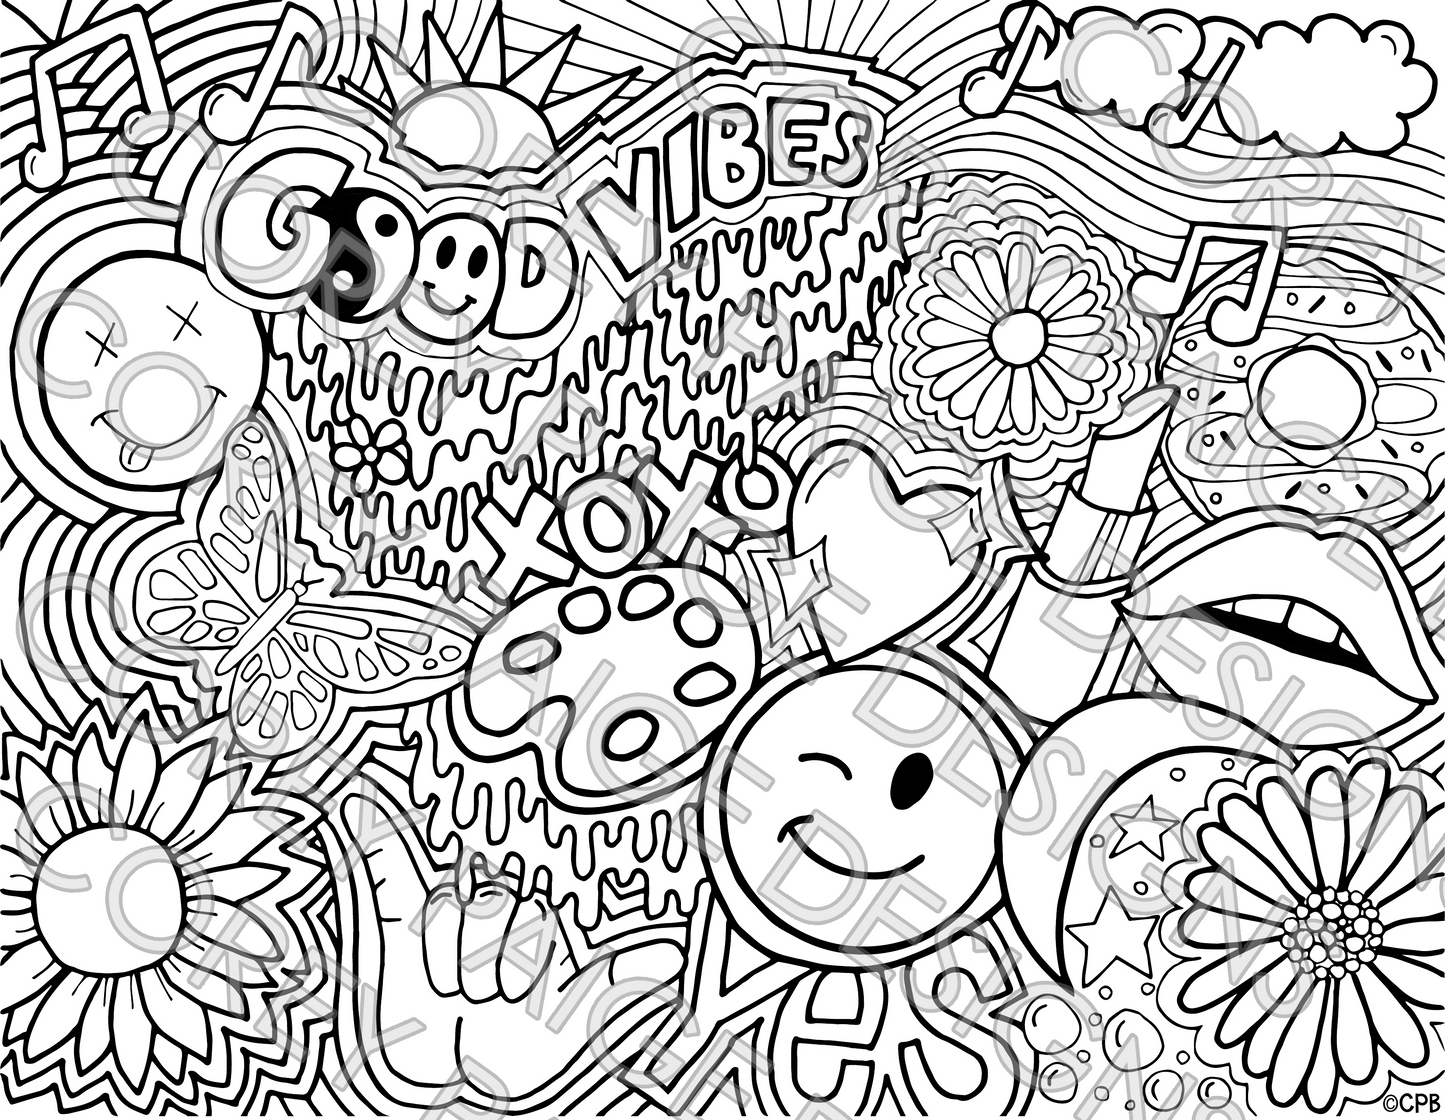 Hippie Collage Coloring Sheet